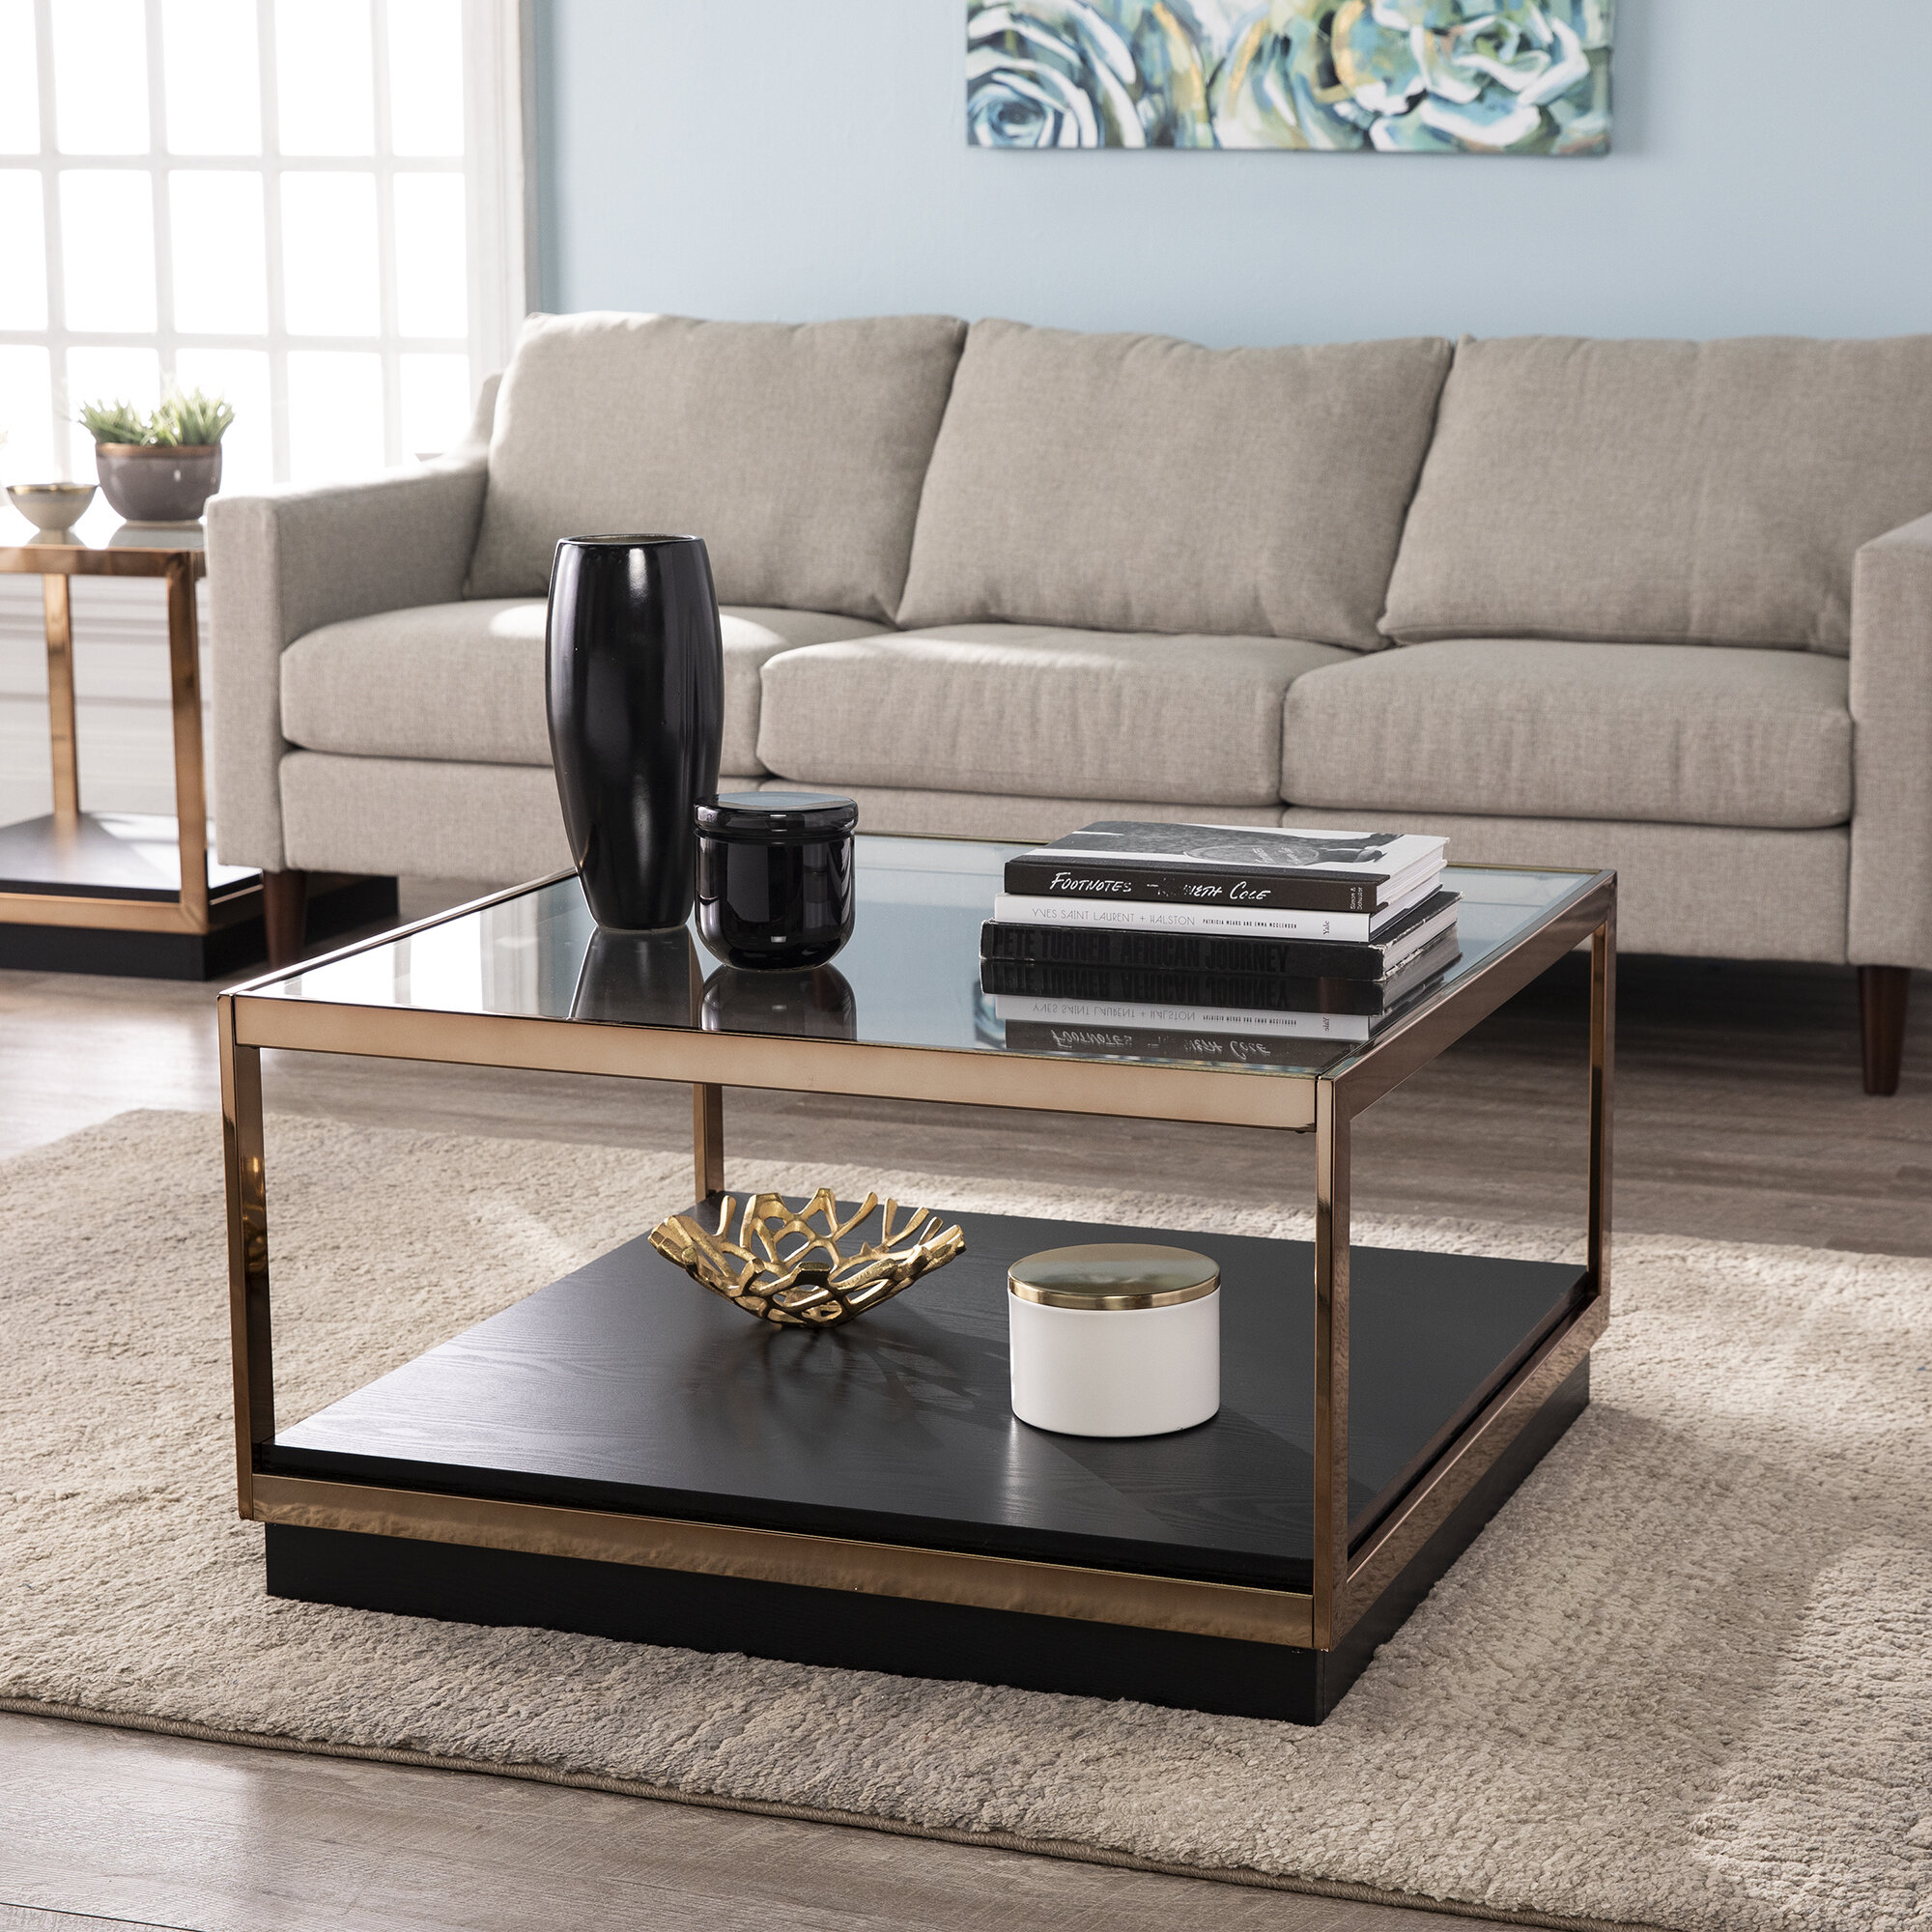 Lexina Frame Coffee Table with Storage